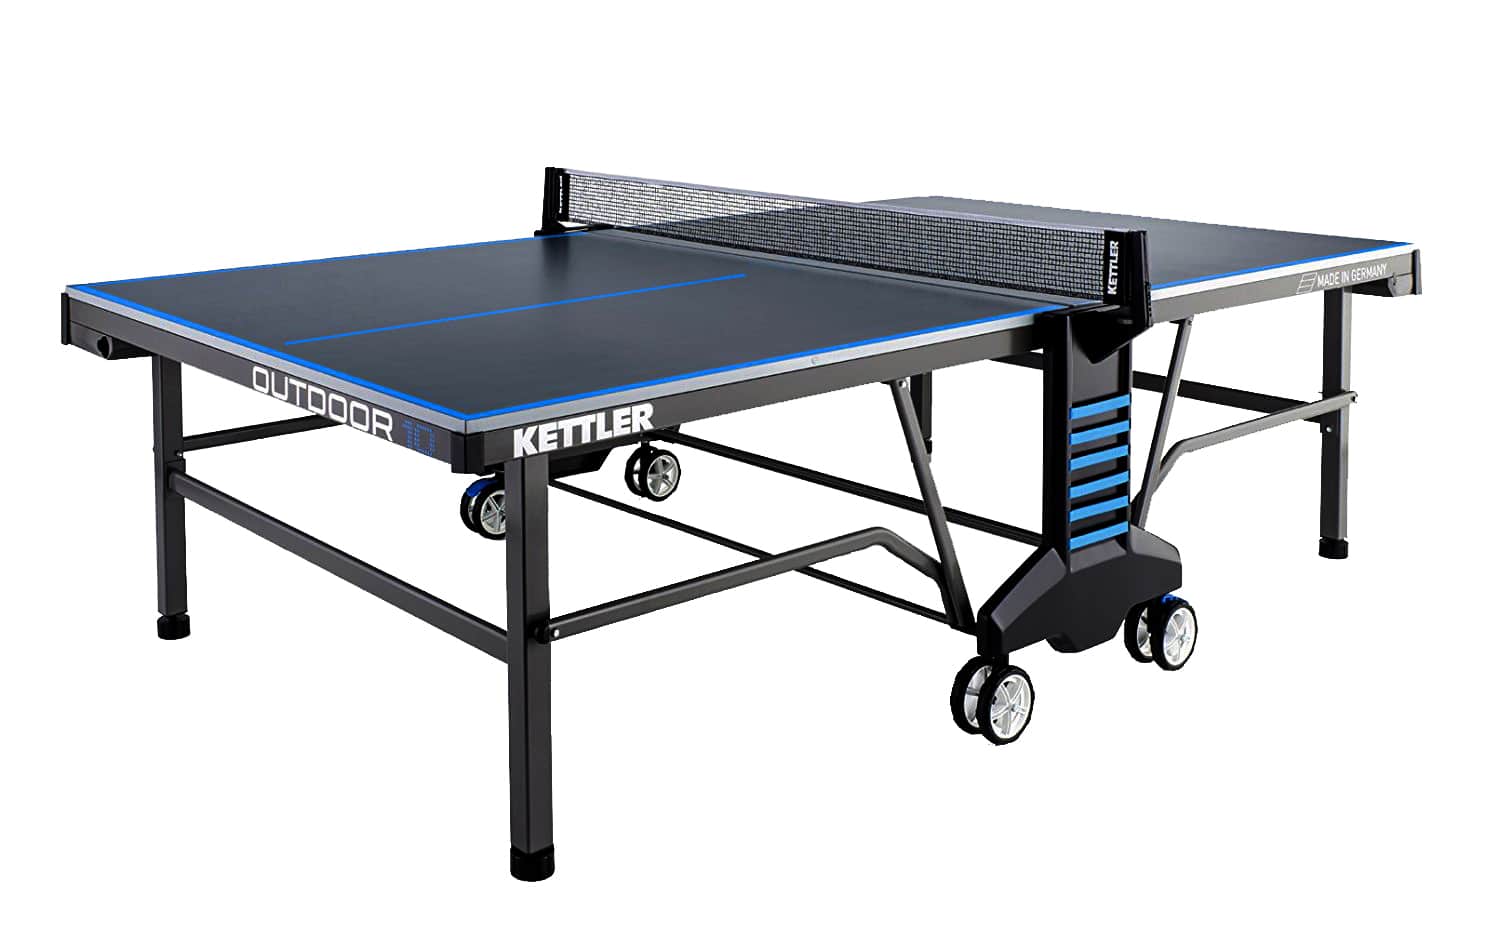 Clearance SALE Indoor or Outdoor Ping Pong Table Tennis Table NJ